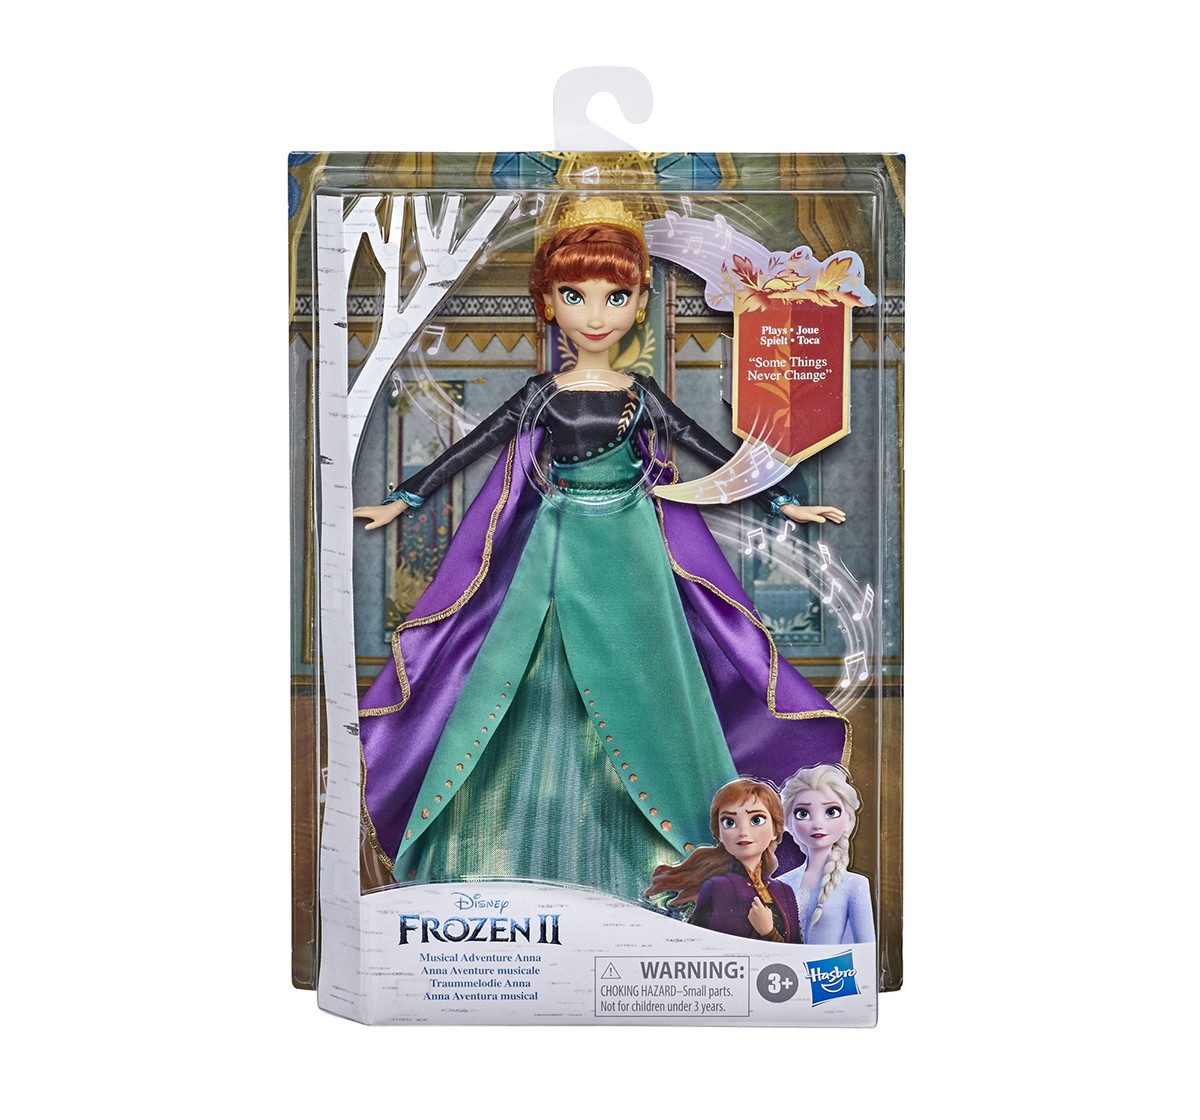 Disney Frozen Musical Adventure Anna Singing Doll, Sings "Some Things Never Change" Song from Disney's Frozen 2 Movie, Anna Toy for Kids  Dolls & Accessories for age 3Y+ 